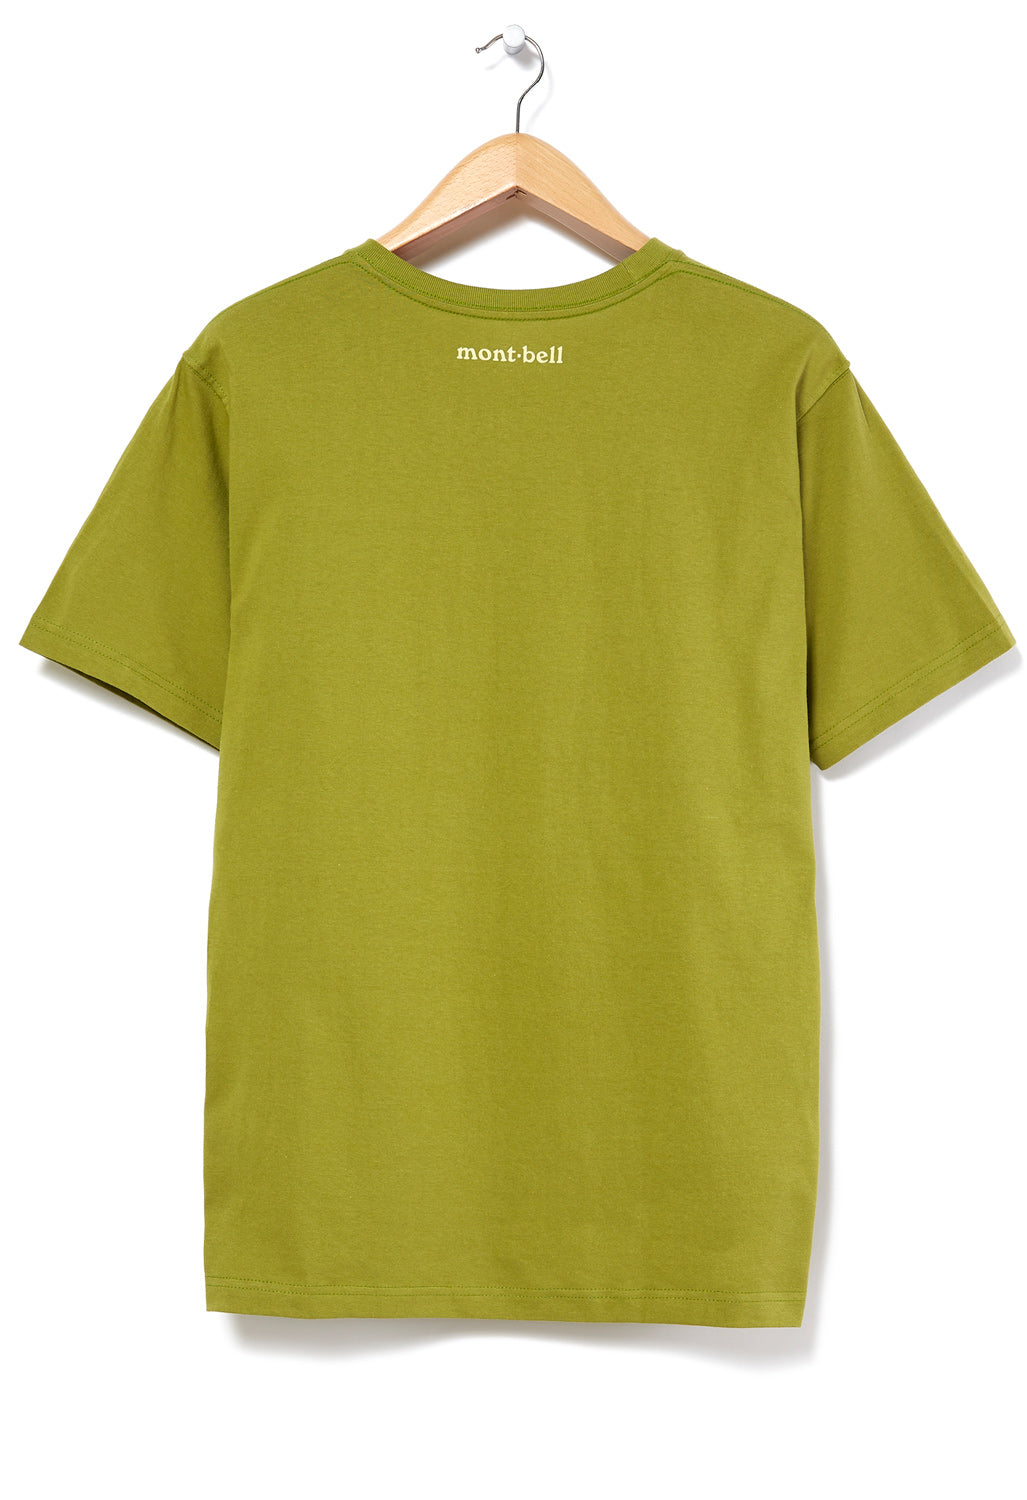 Montbell Pear Skin Cotton mont-bell Iwa Logo T-Shirt - Light Thyme